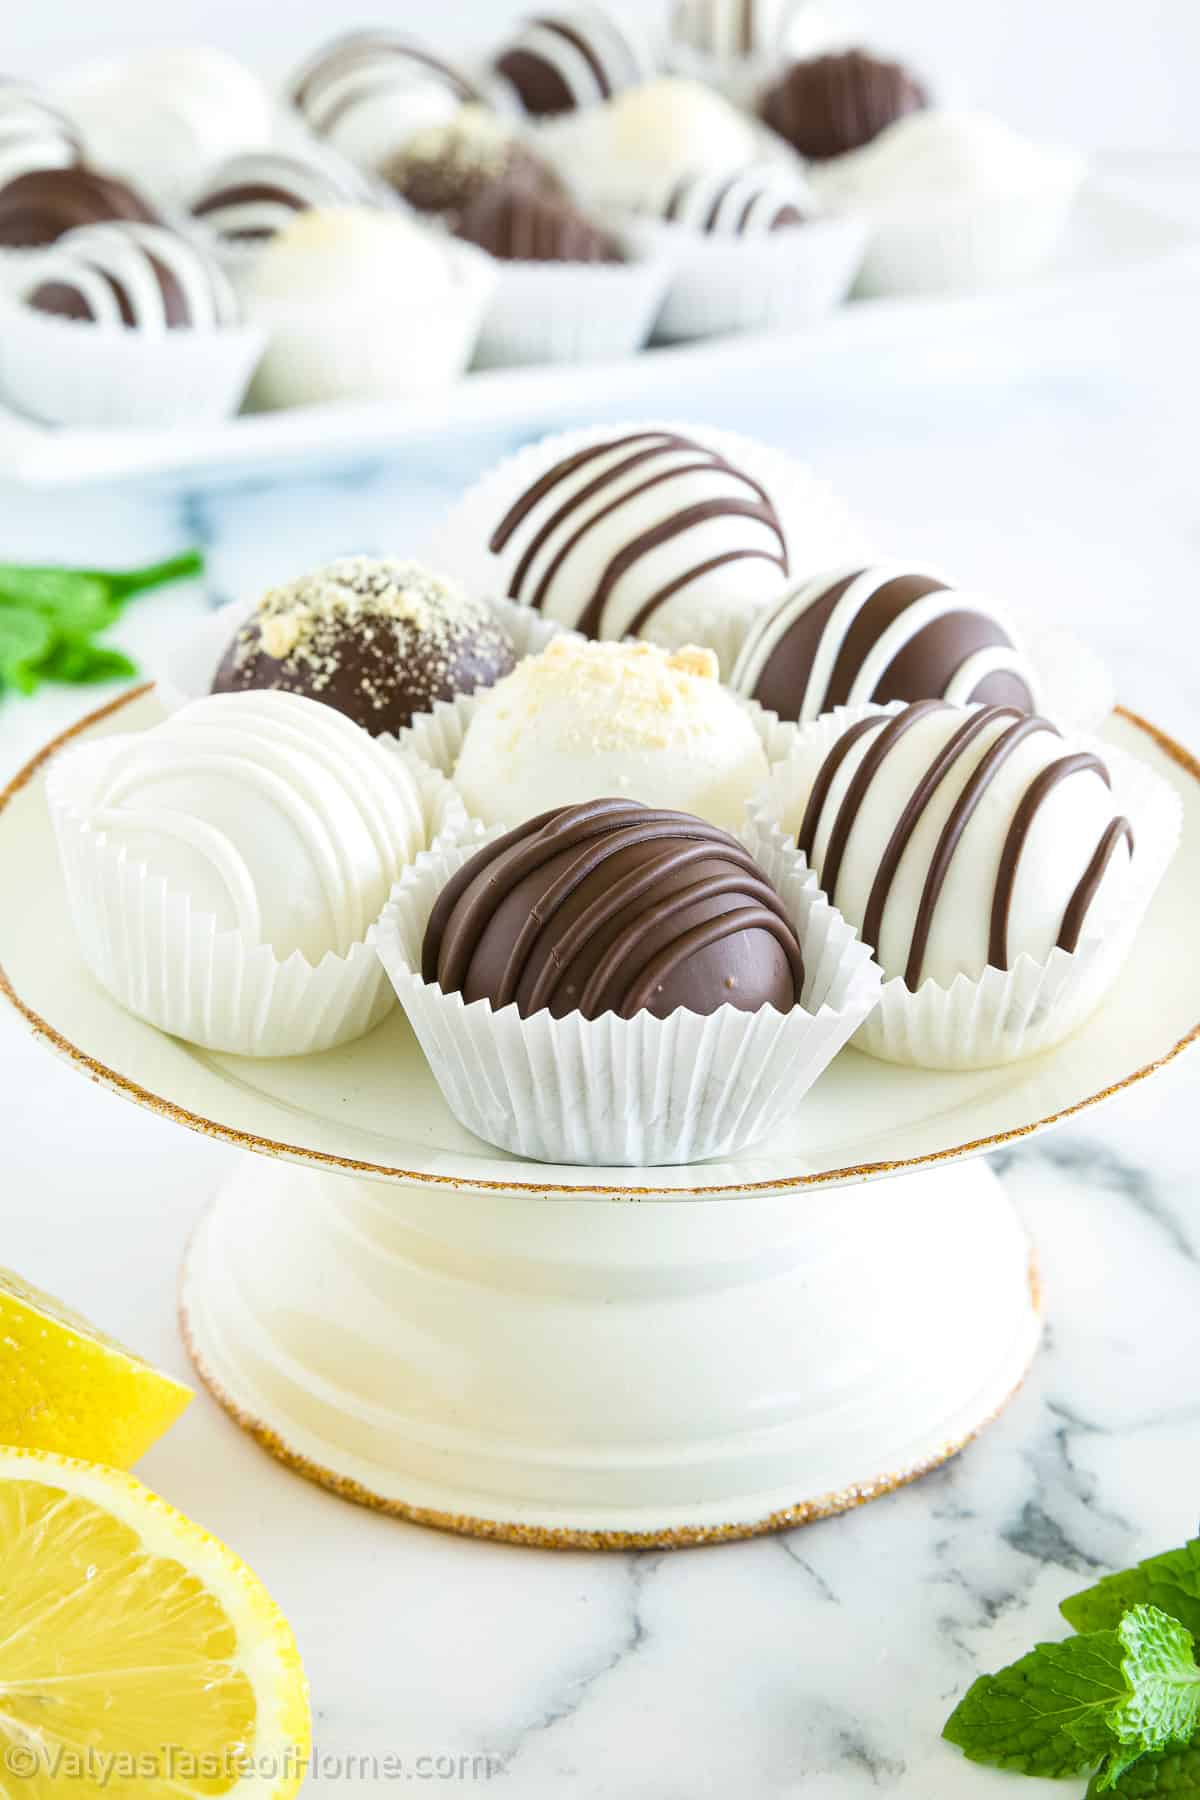 These bite-sized truffles combine the classic flavor of Oreos with chocolate and a hint of lemon for an irresistible combination.